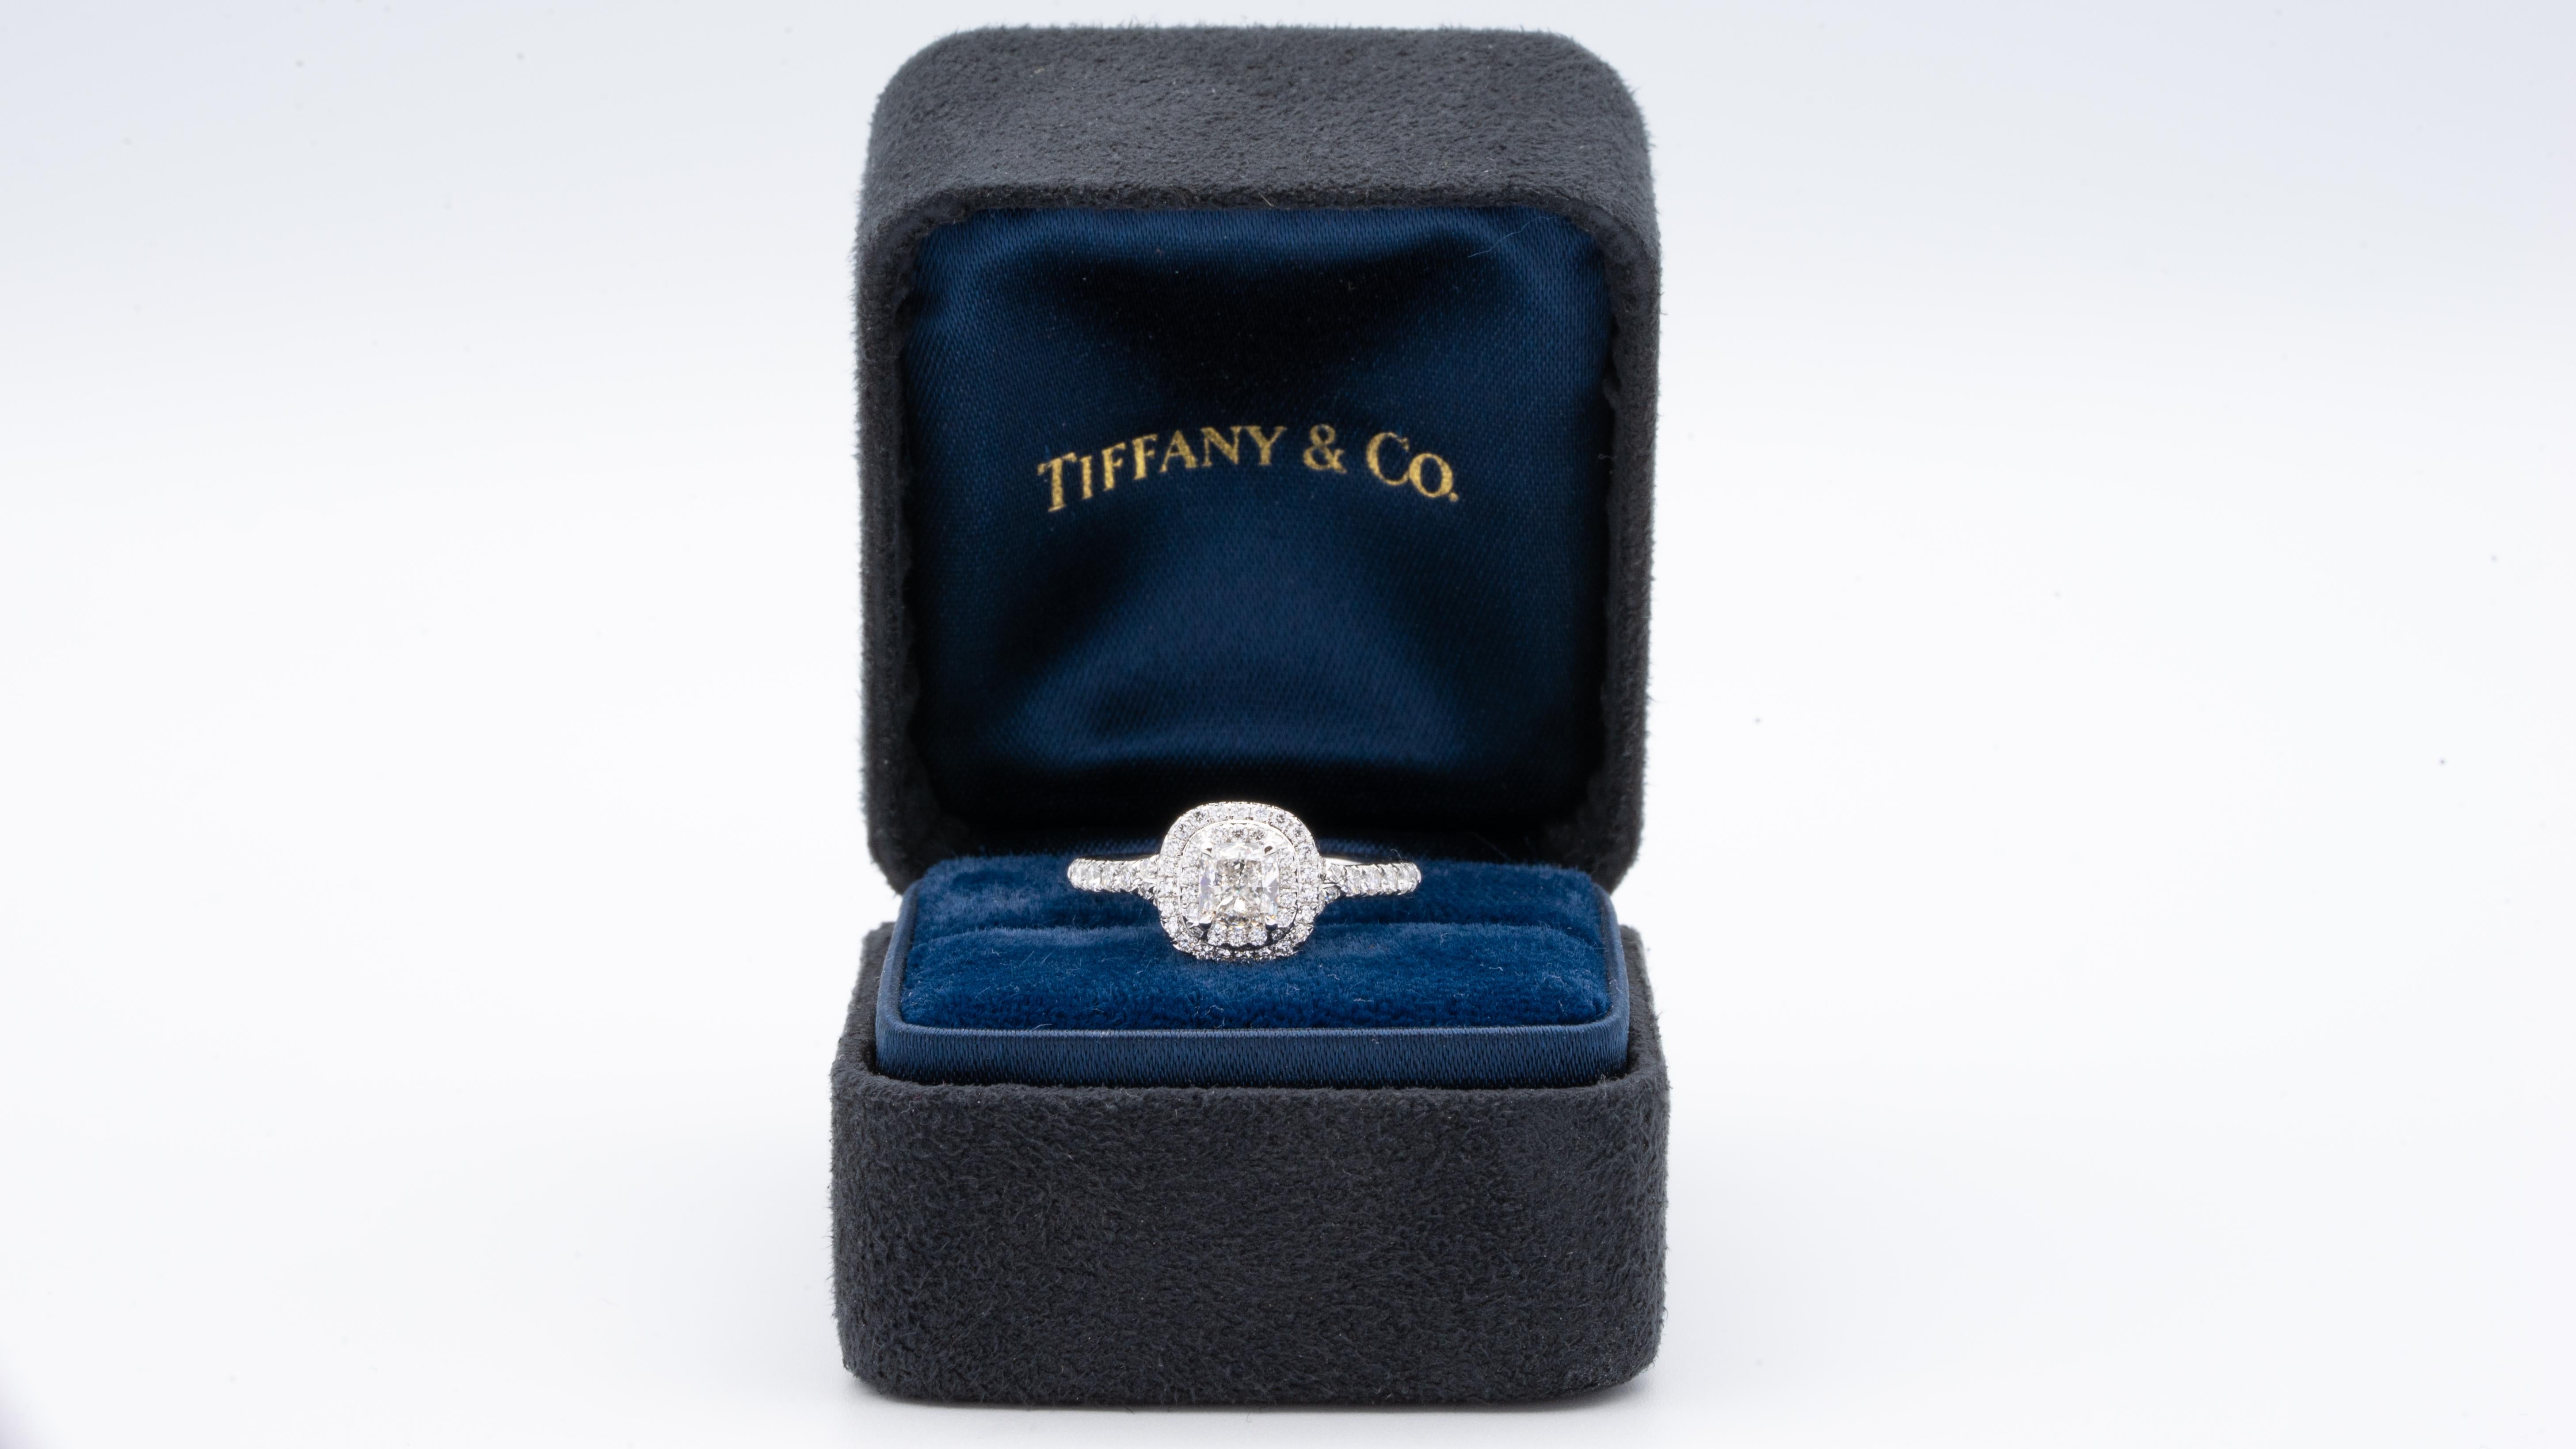 Tiffany & Co. Soleste engagement ring with an Excellent cut 0.49 ct cushion center , F Color, VS1 clarity finely crafted in a platinum double row halo design with round brilliant cut bead set diamonds.
Includes Original Tiffany Certificate and